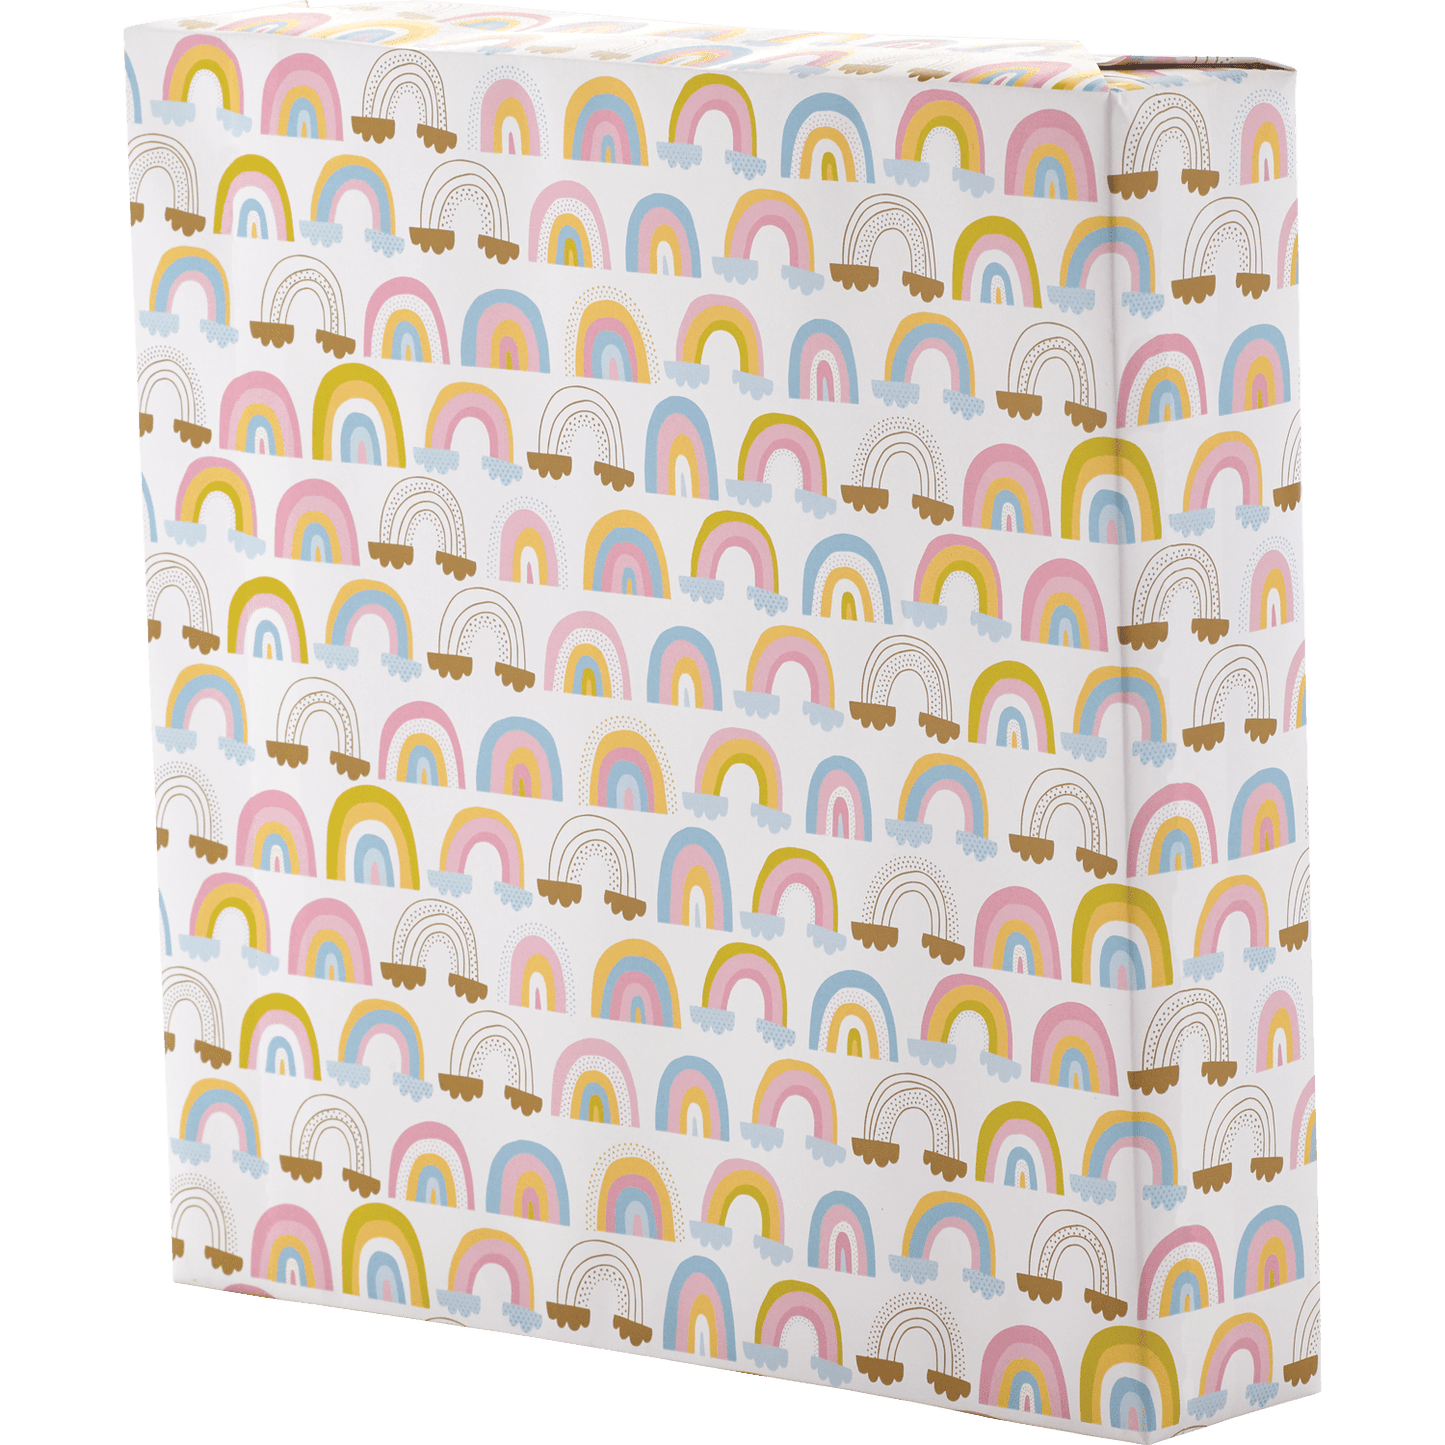 Pink mustard light blue baby rainbows with clouds on whited wrapping paper